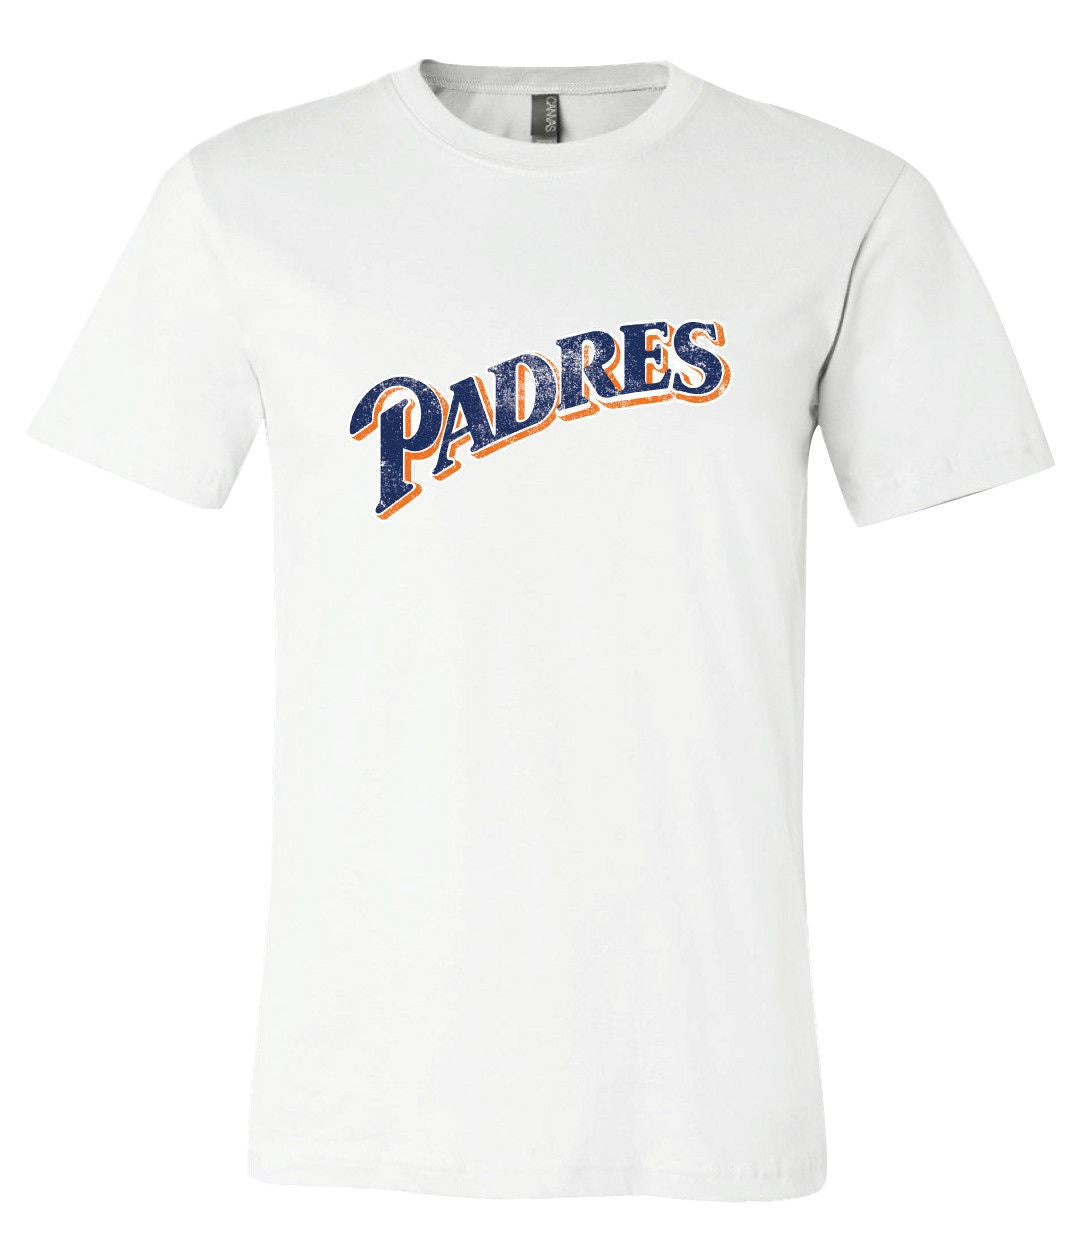 San Diego Padres vintage jersey t shirt size XL